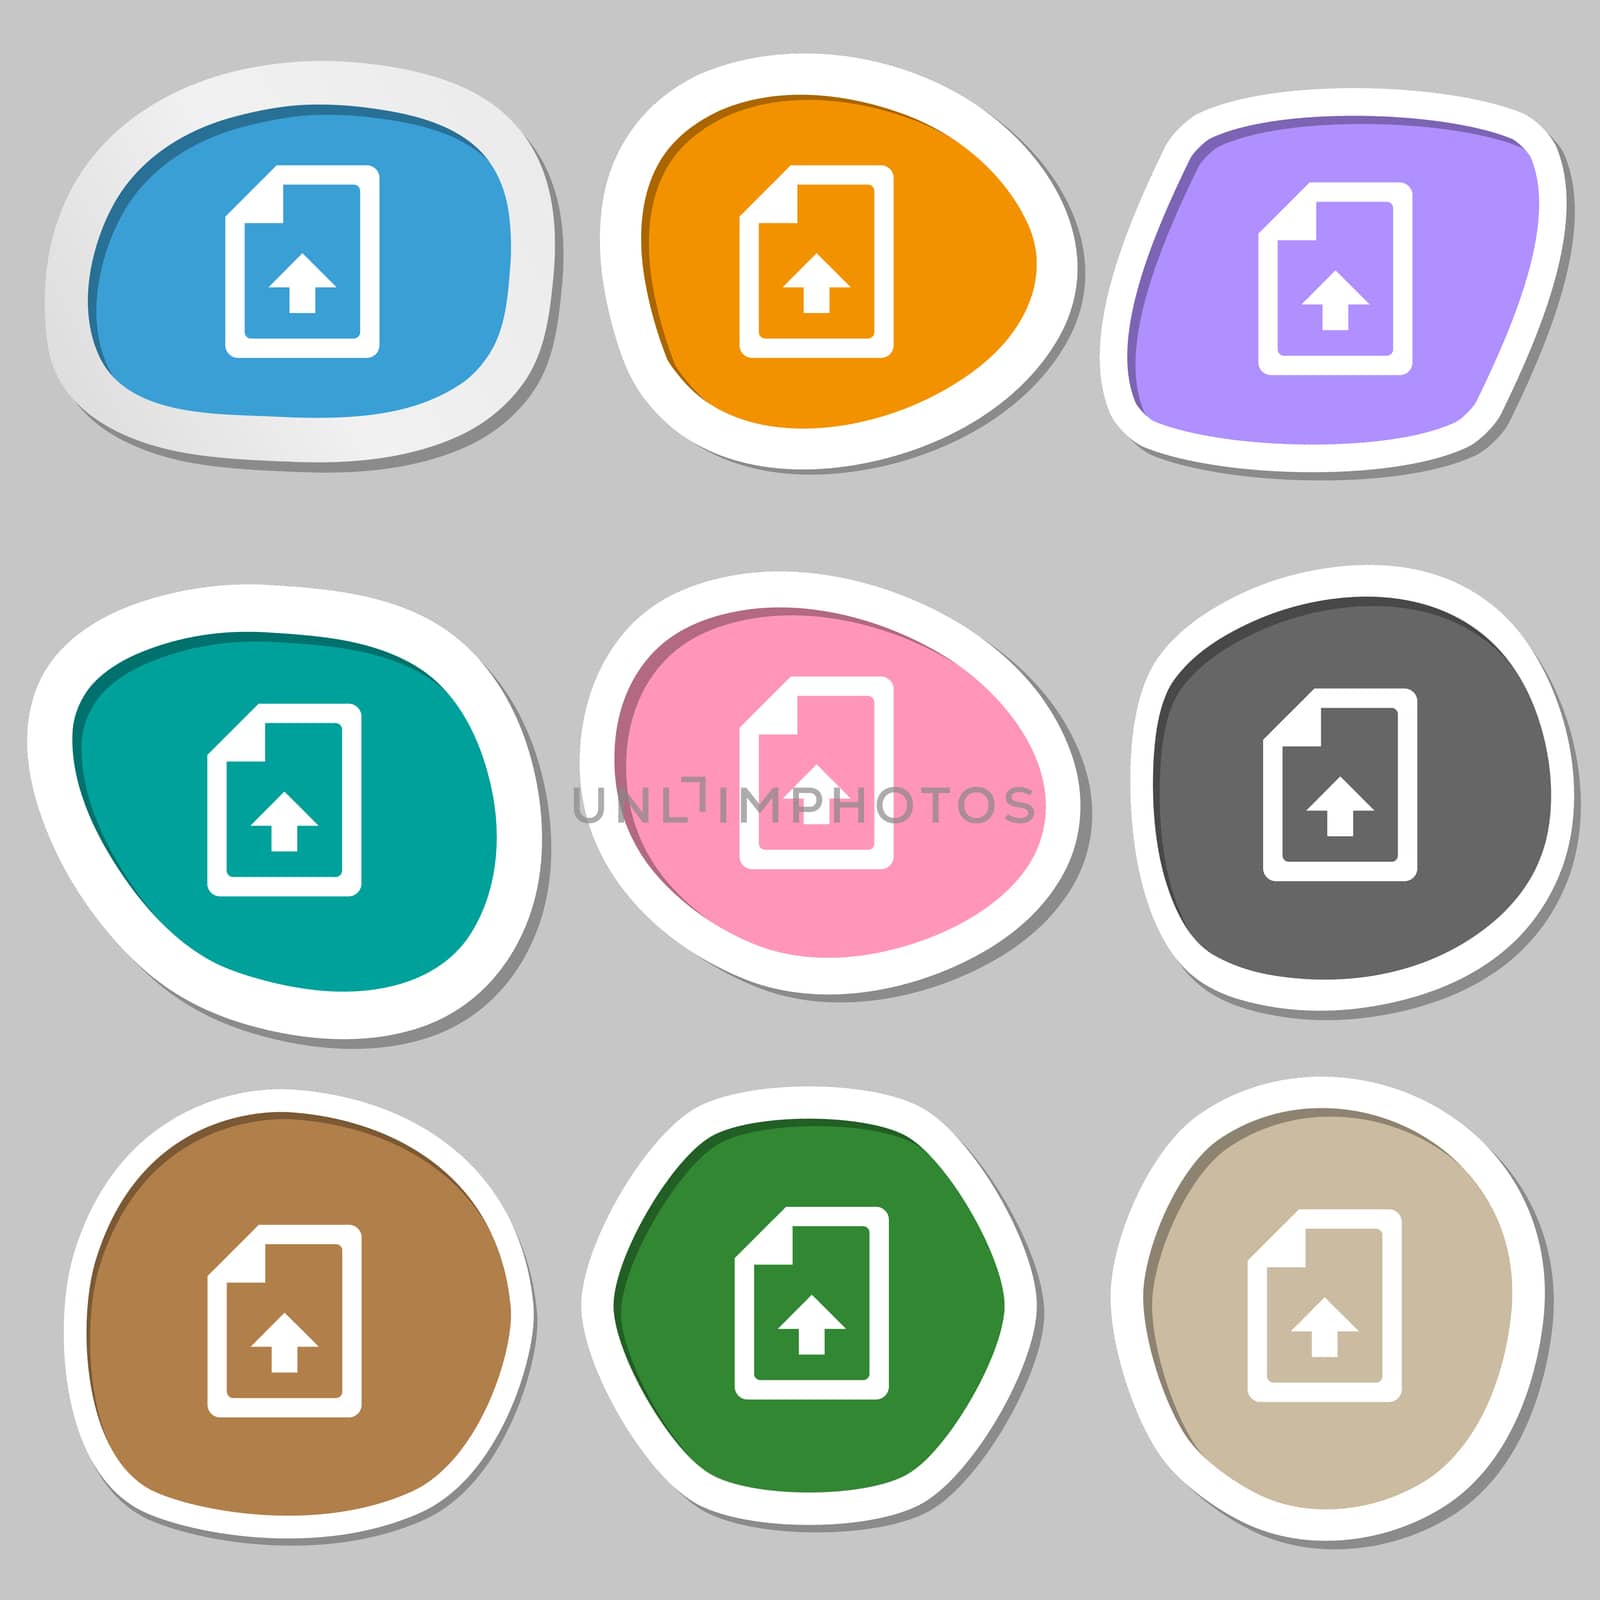 Export, Upload file icon symbols. Multicolored paper stickers.  by serhii_lohvyniuk